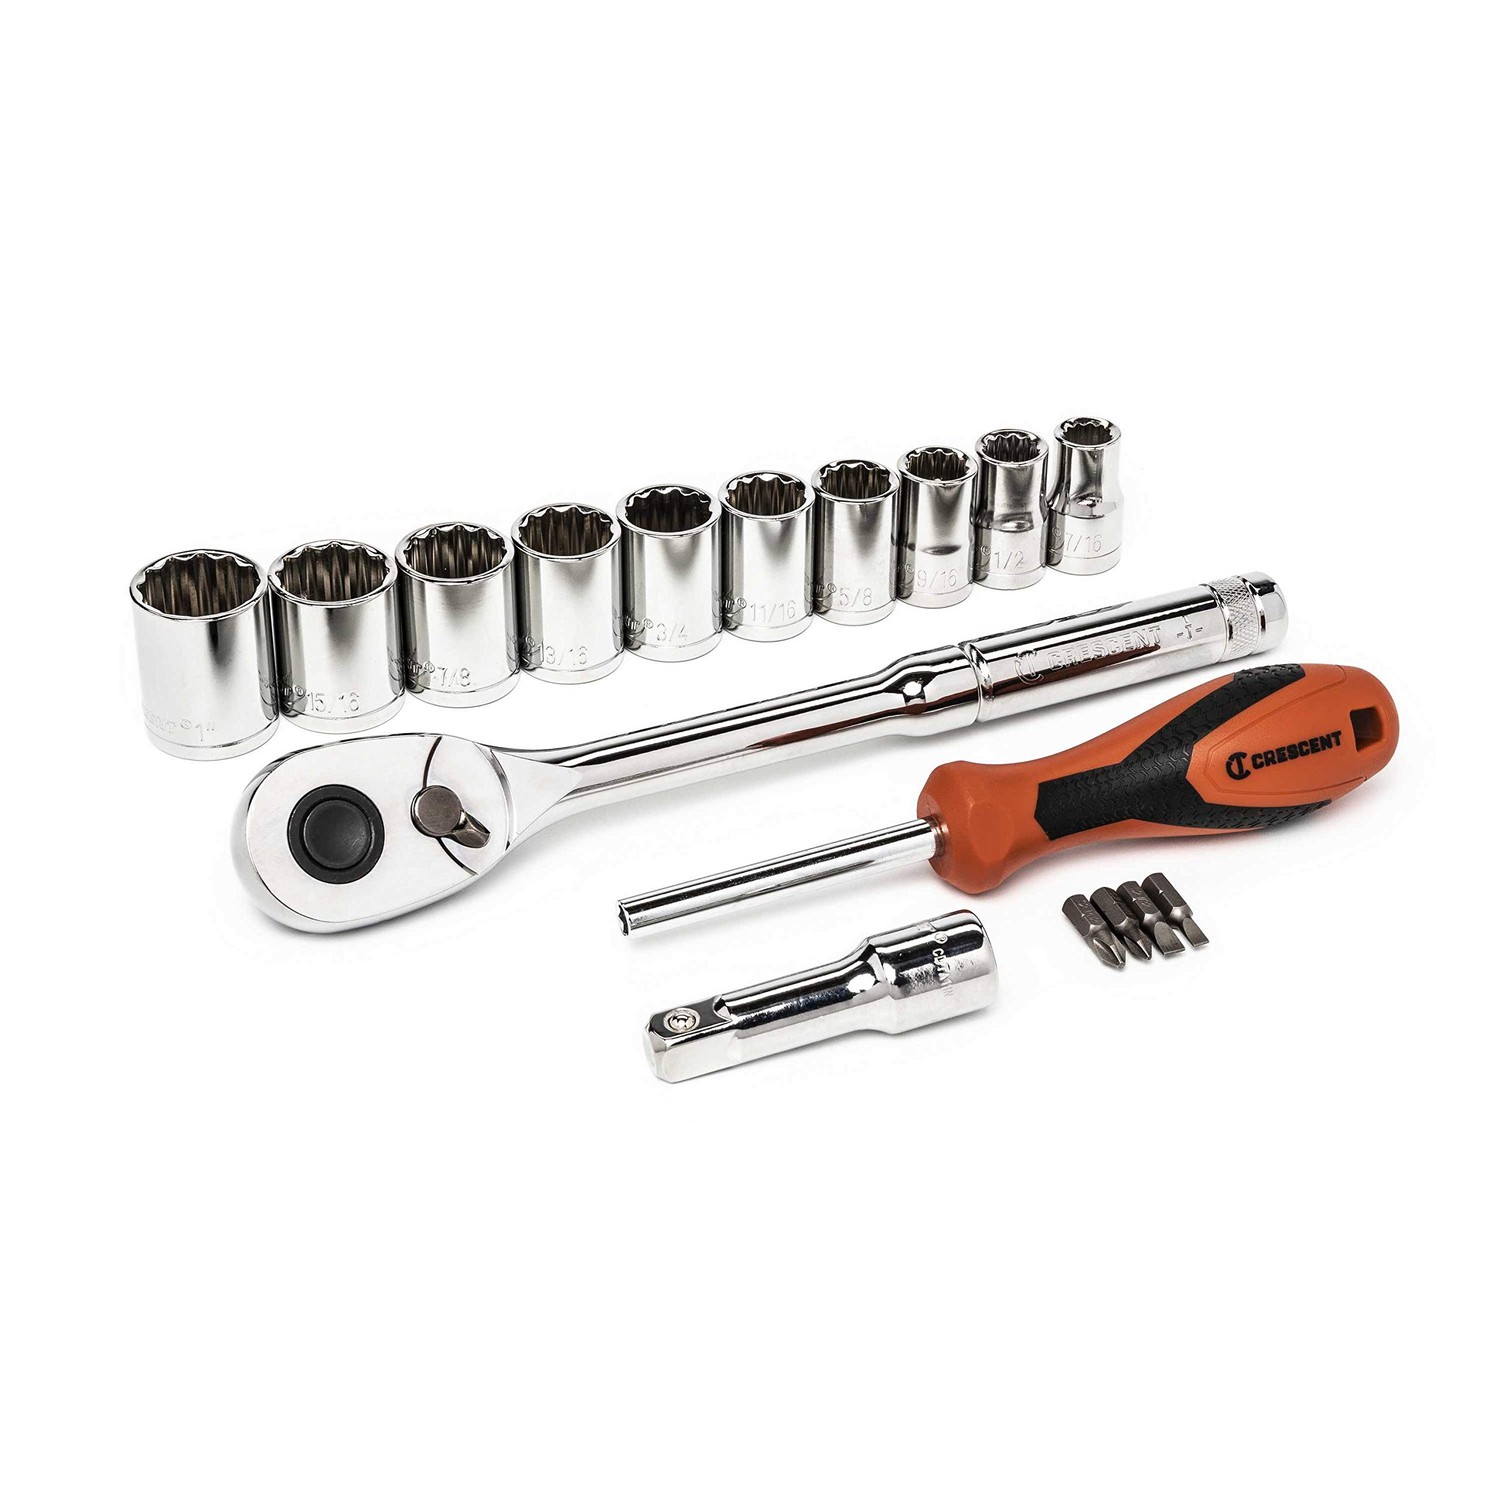 CSWS11C 1/2Dr 17Pc Wrench Set